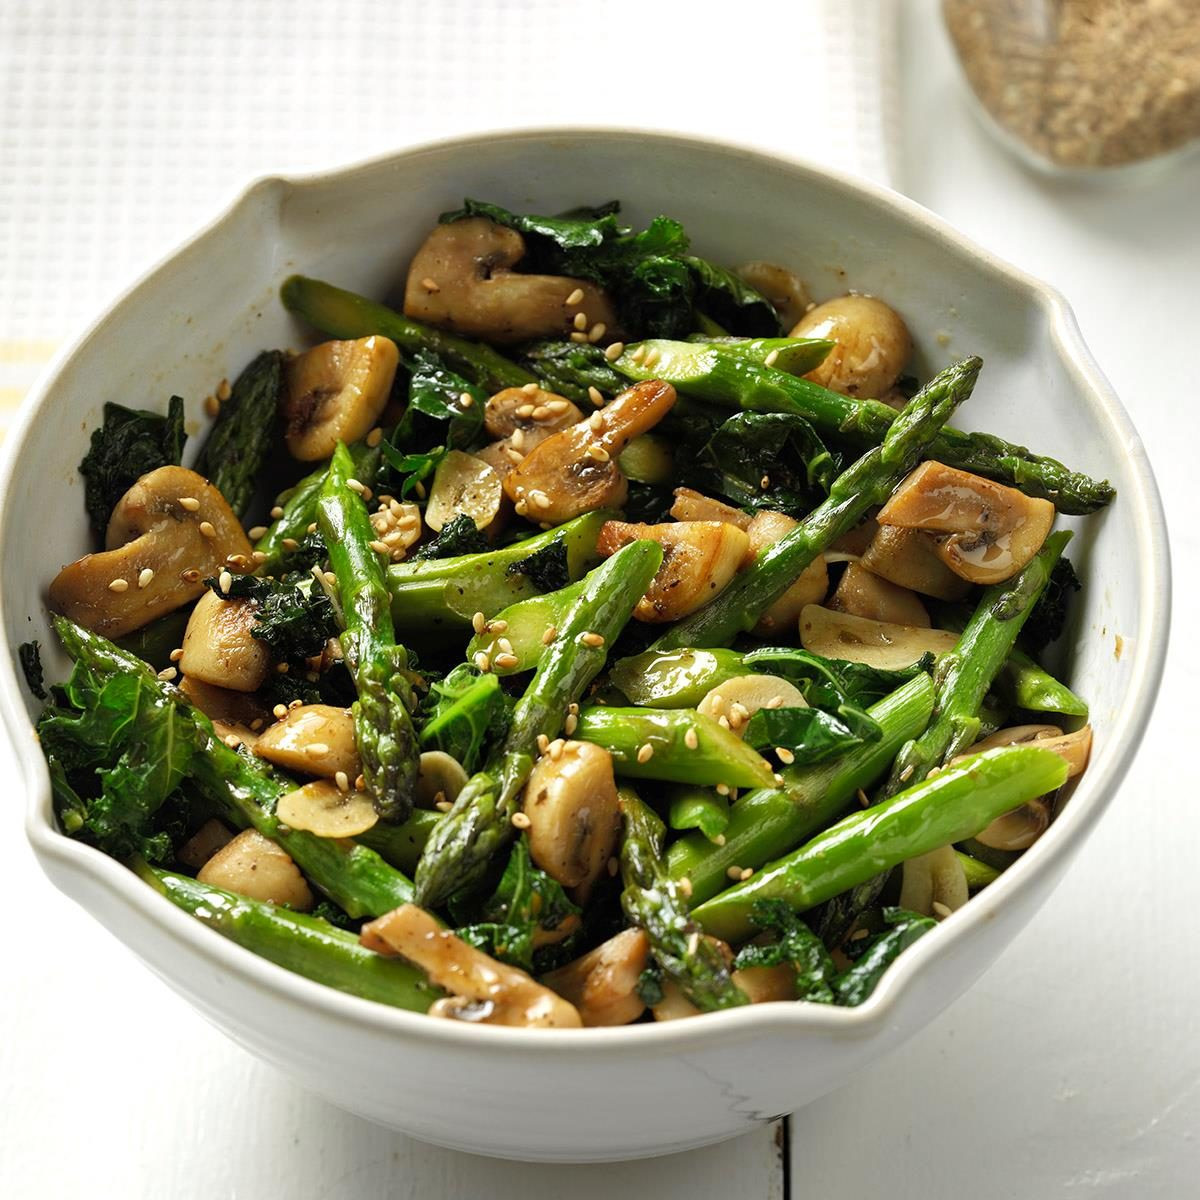 The top 15 Kale and Mushroom Recipes